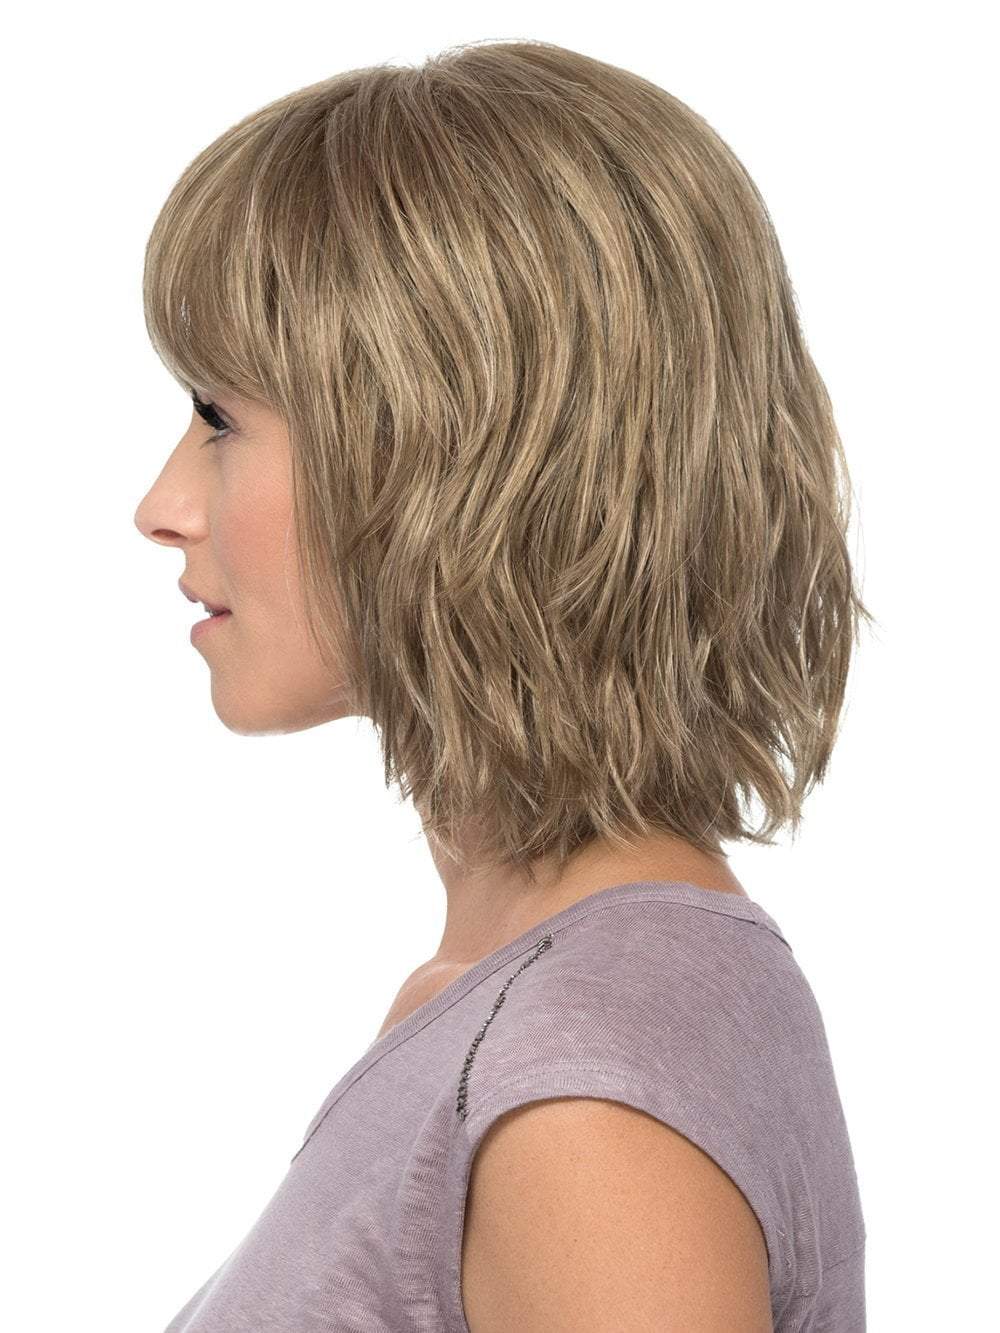 Designed with a mono crown, Hunter's bangs and distinctive waves bring a modern flair to the classic bob style